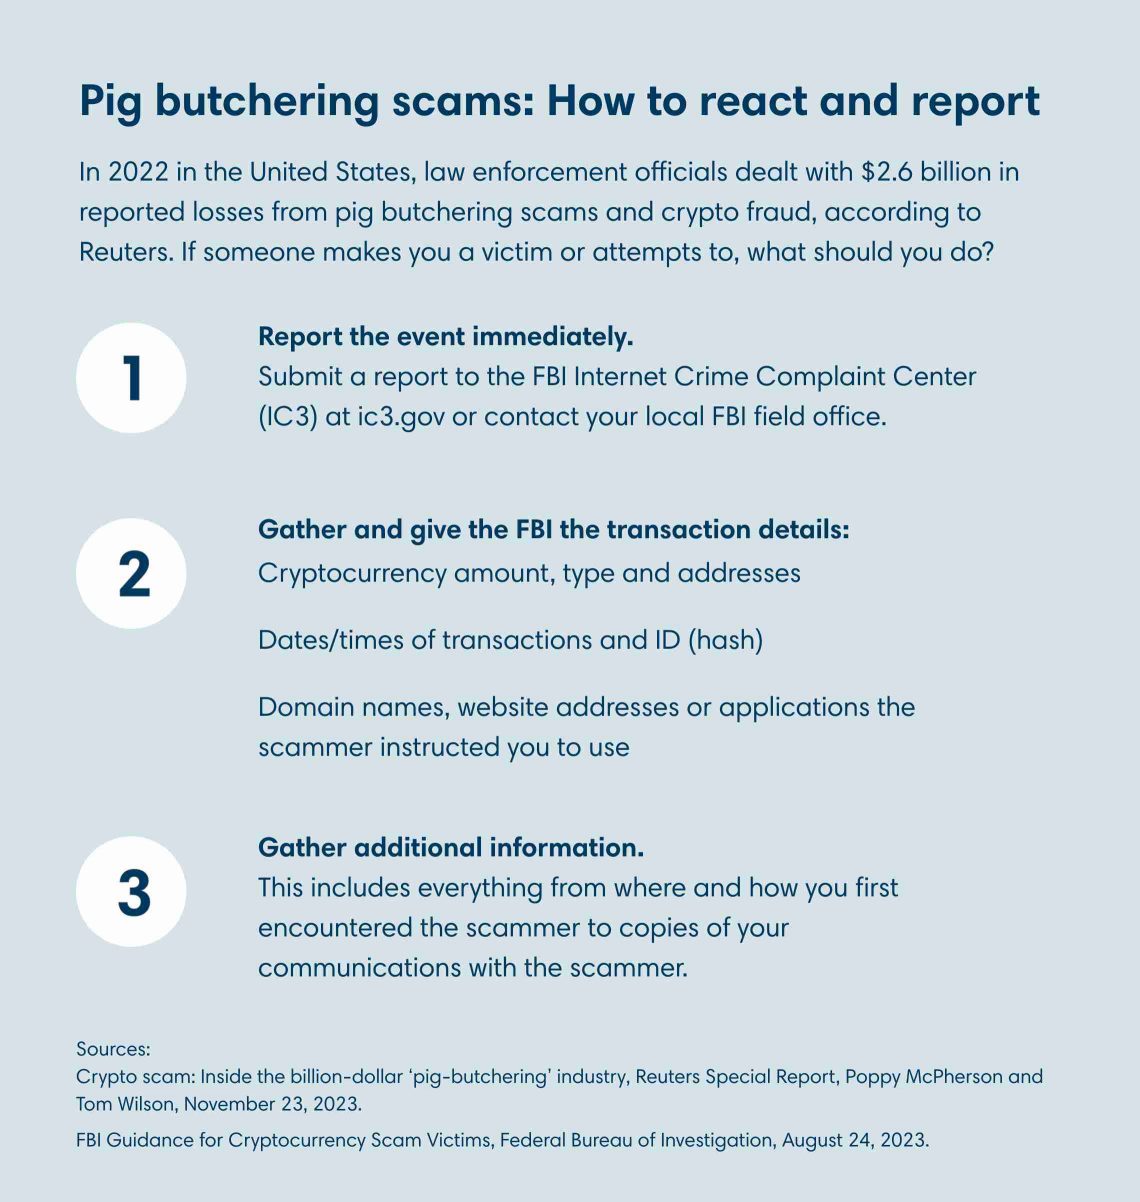 Infographic detailing pig butchering scams and how to react and report in 3 steps